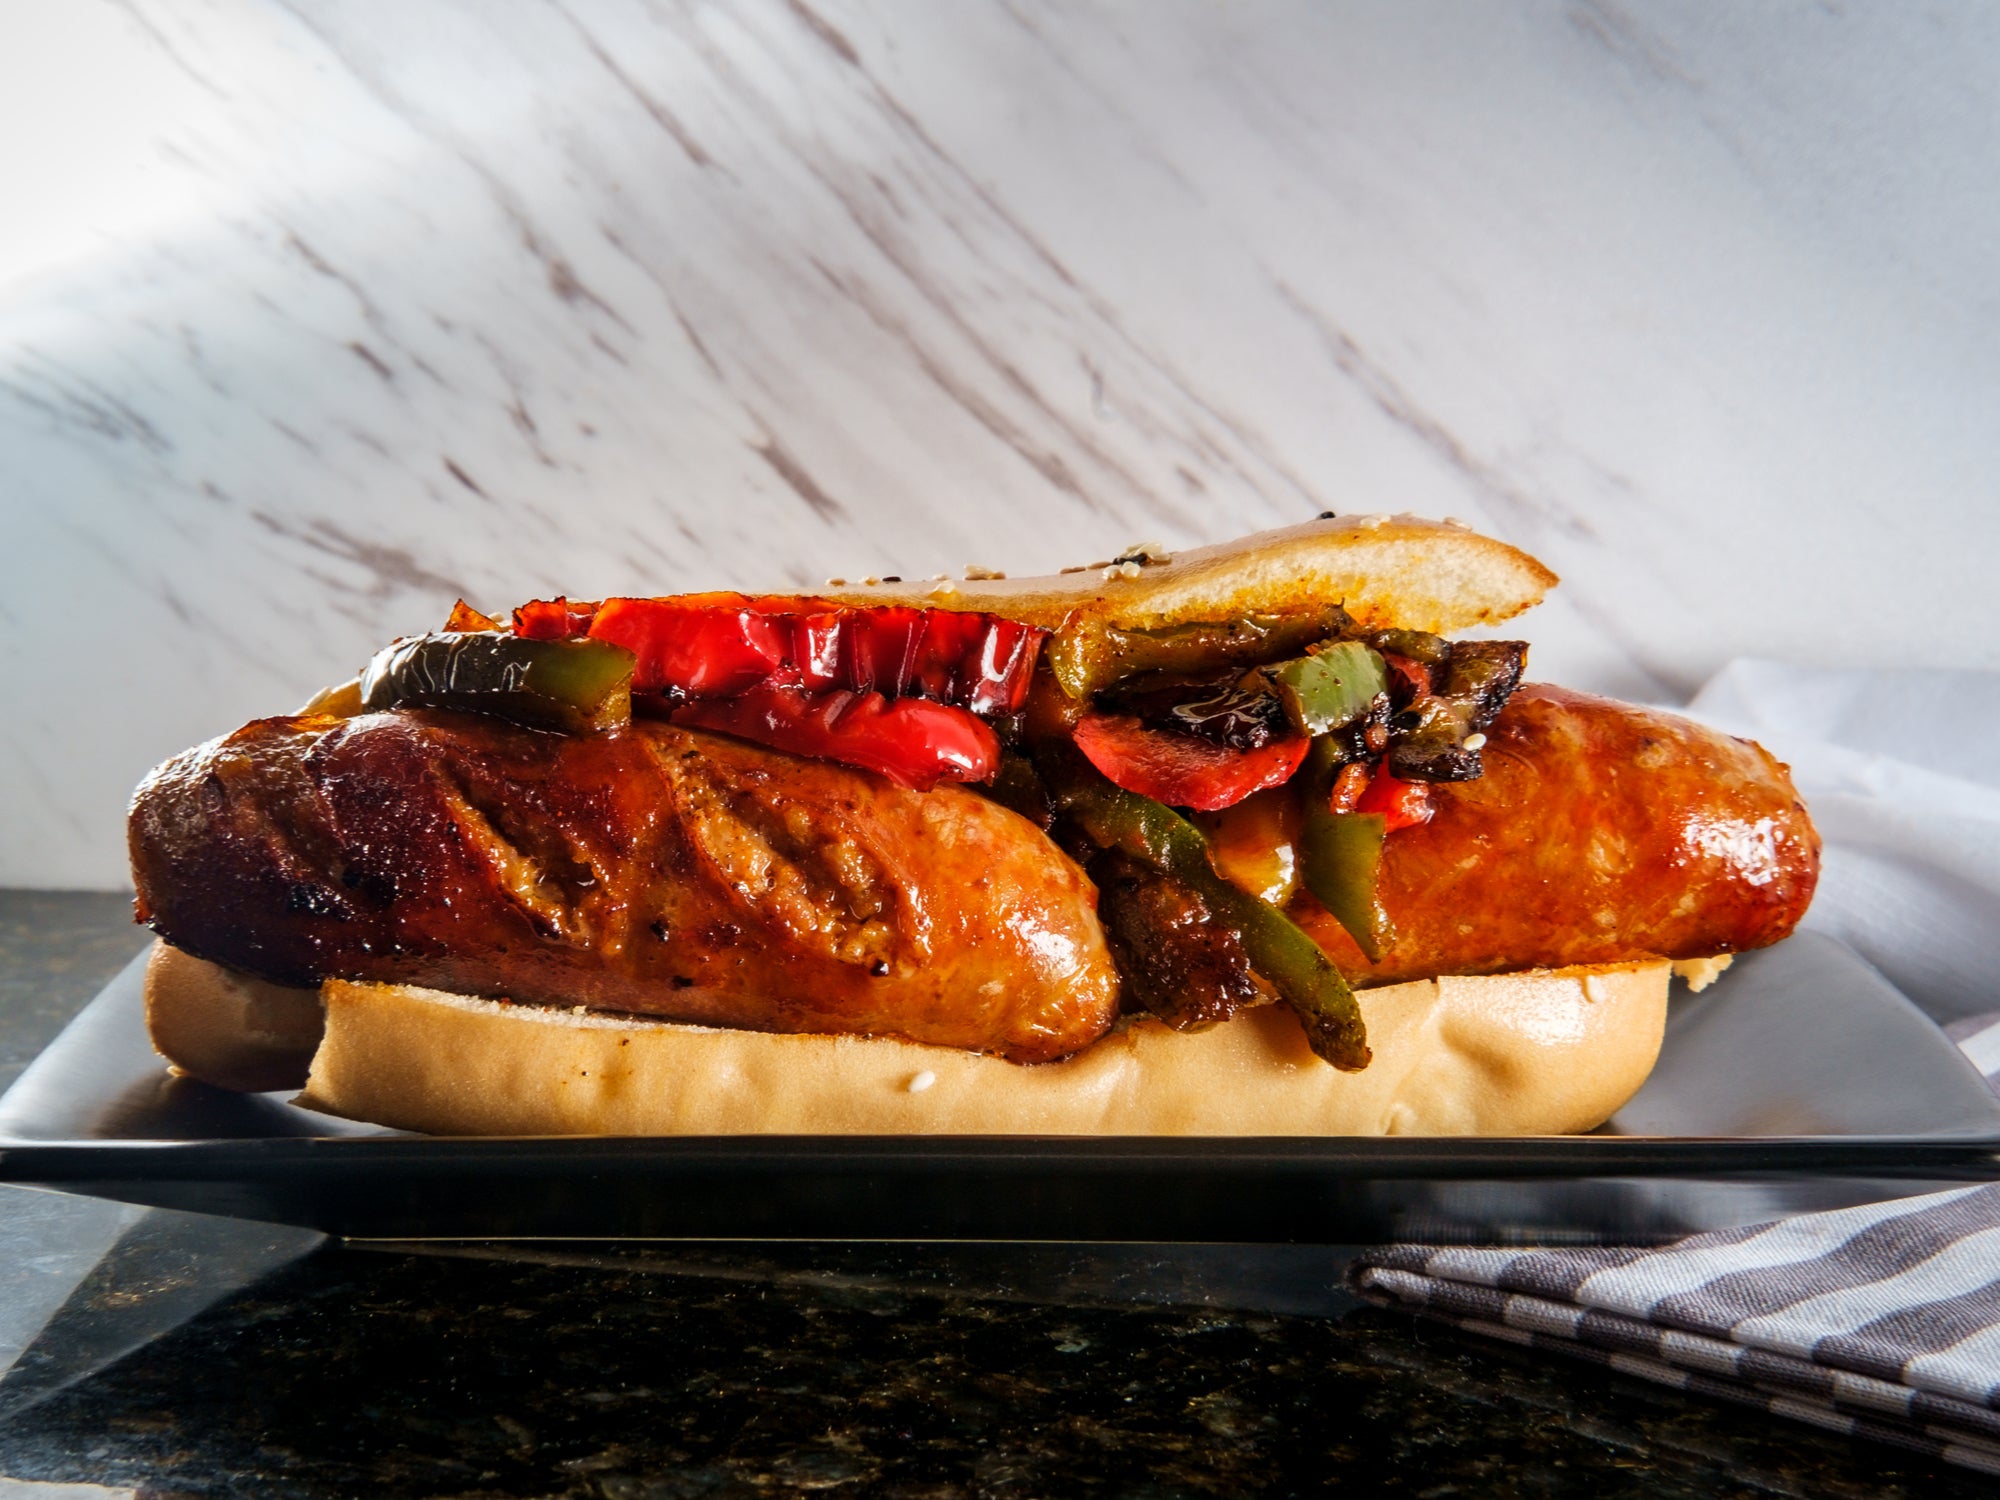 https://cdn.shopify.com/s/files/1/0093/2537/9669/files/Grilled_Sausage_Peppers_Onions_2048x2048.jpg?v=1633957870